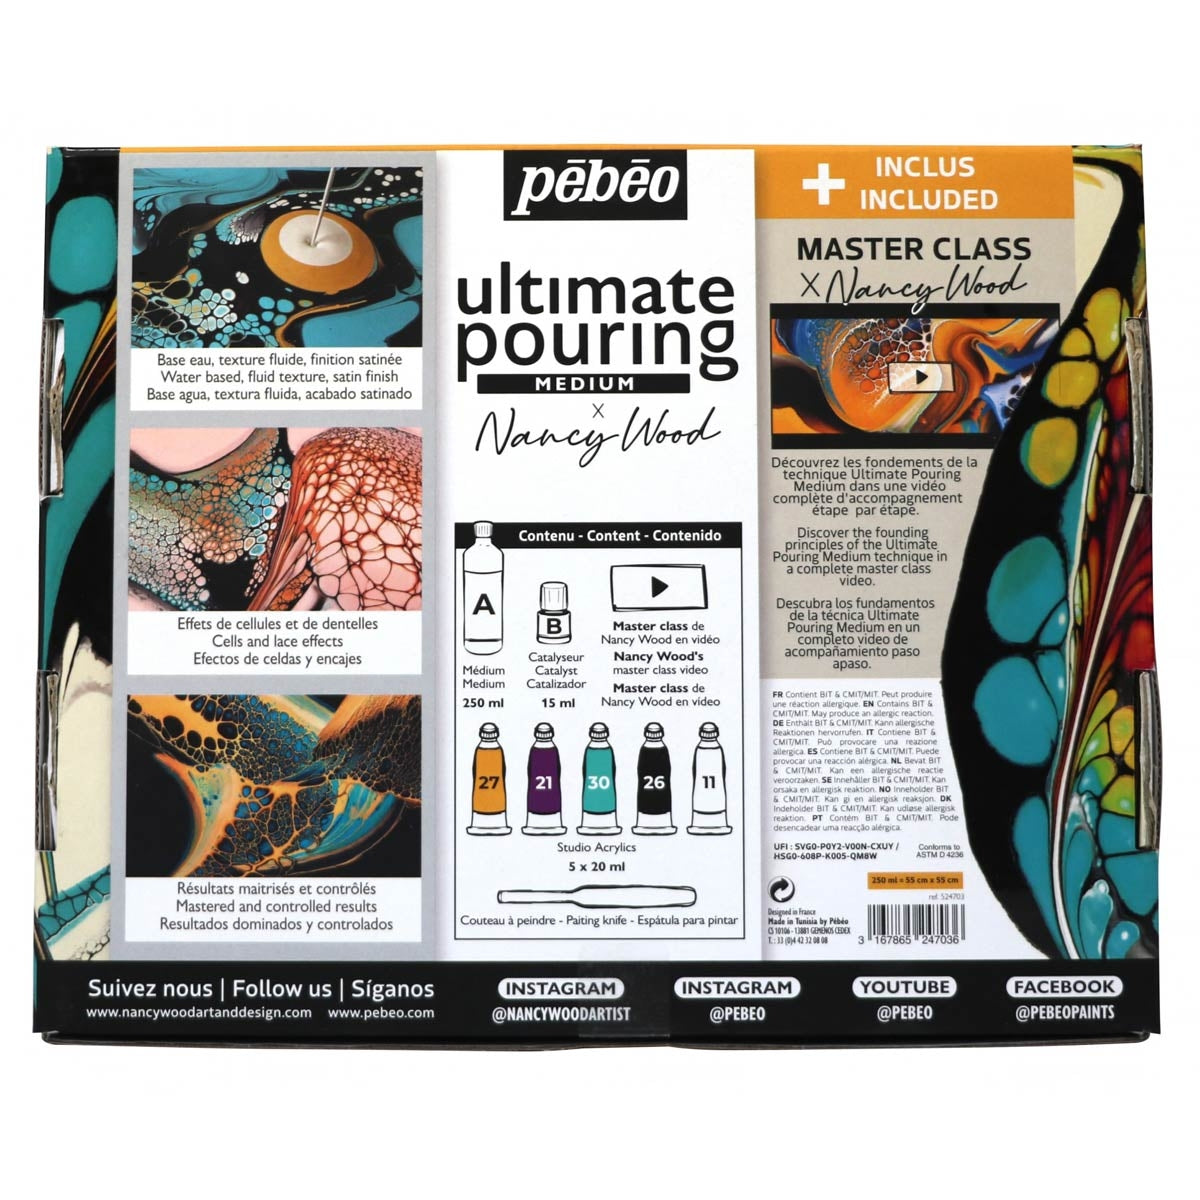 Pebeo - Ultimate Pouring Medium Discovery Kit